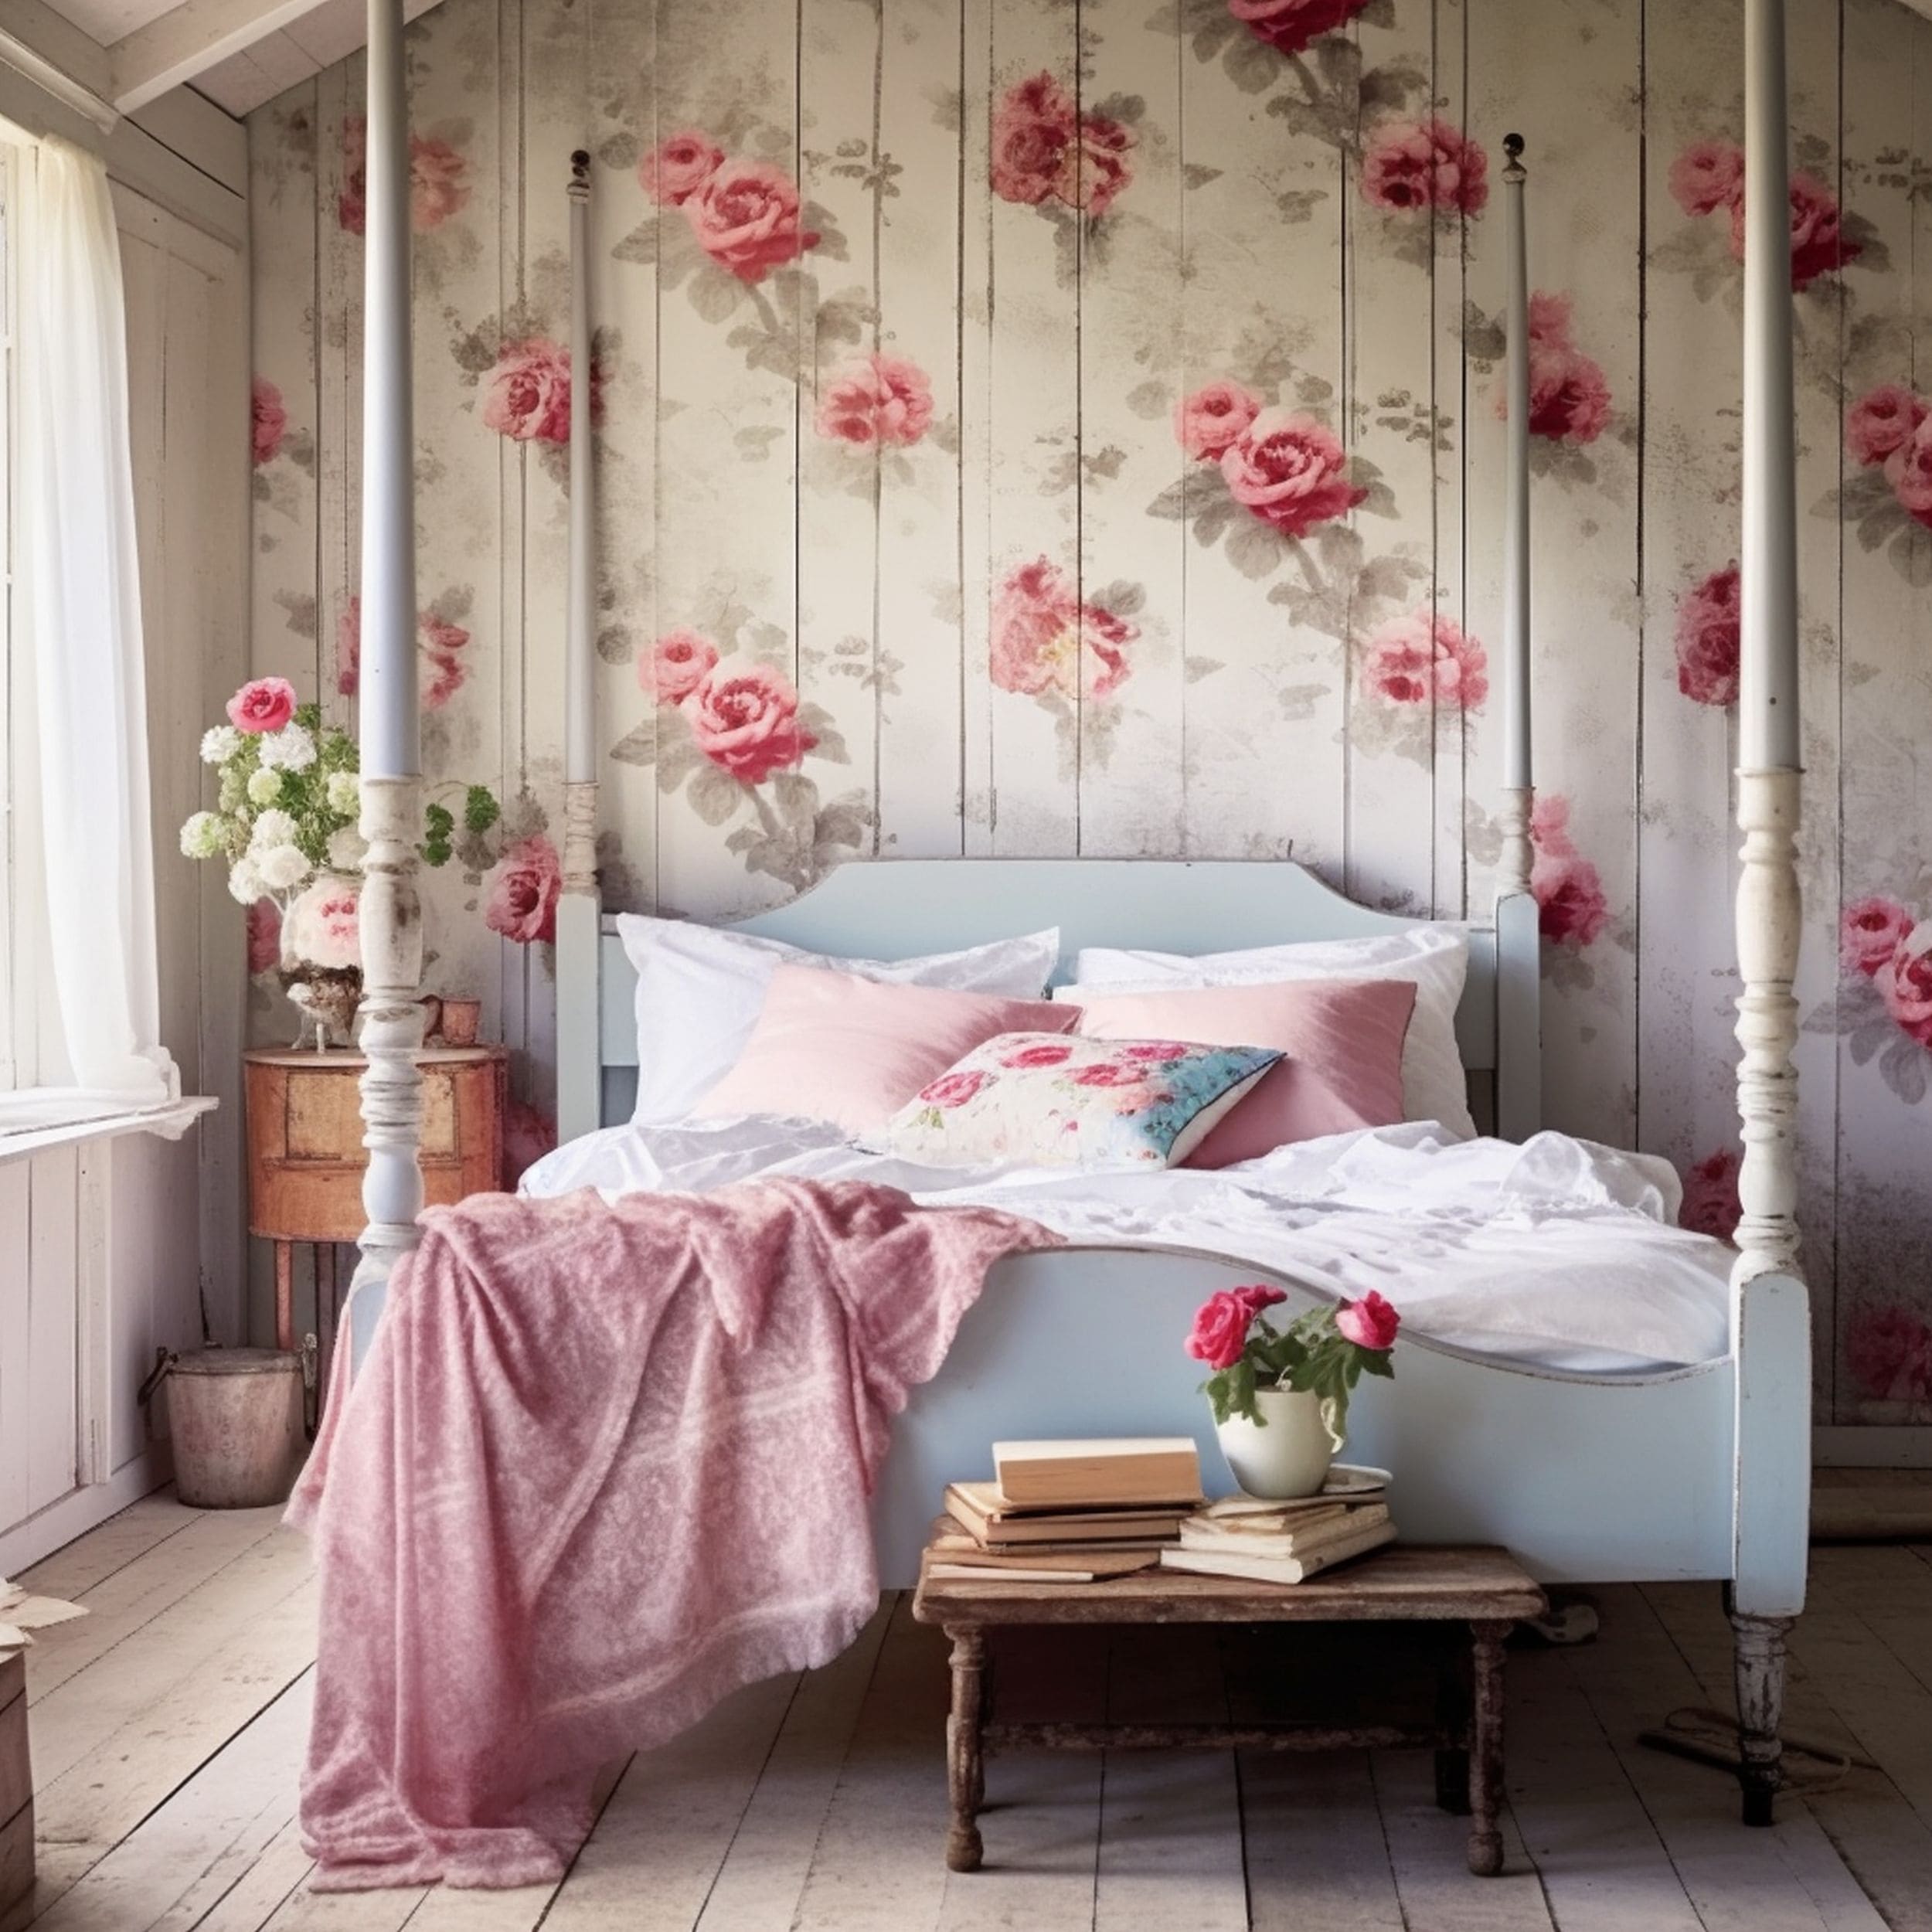 Shabby Chic Bedroom With Rose Wallpaper